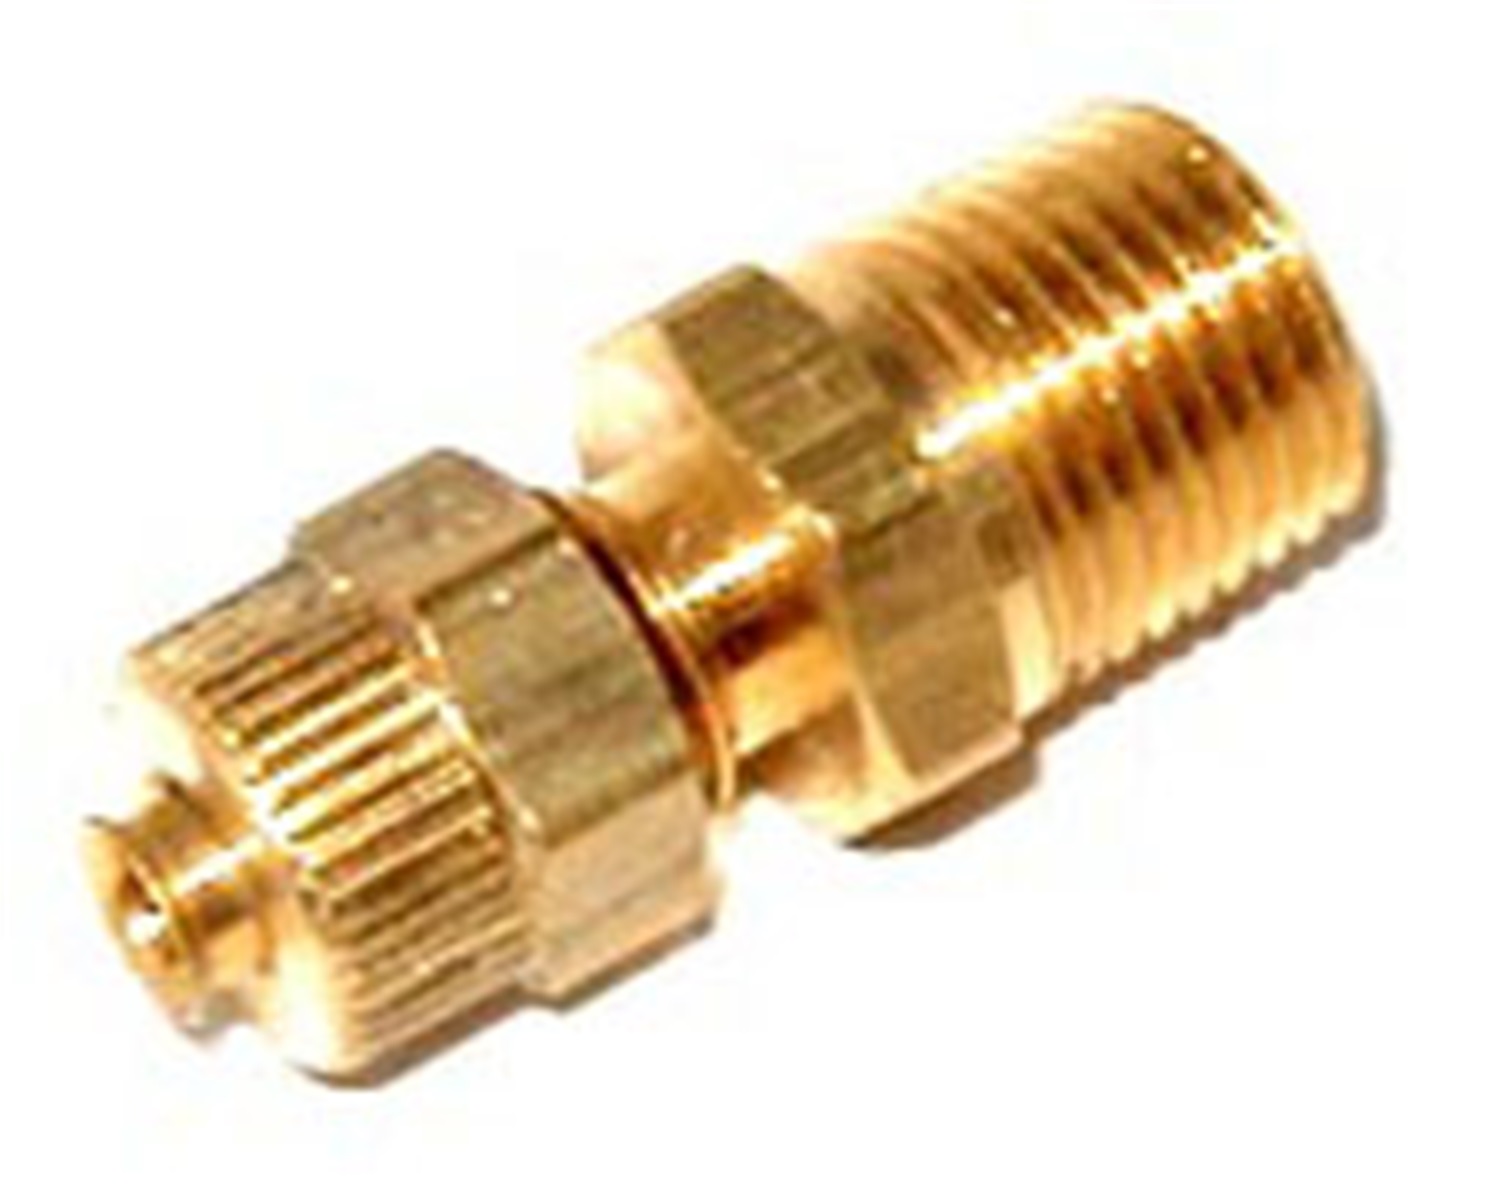 Fuel Hose Fitting, NOS Fittings NOS, 1/8NPT-1/8in. COMP FIT